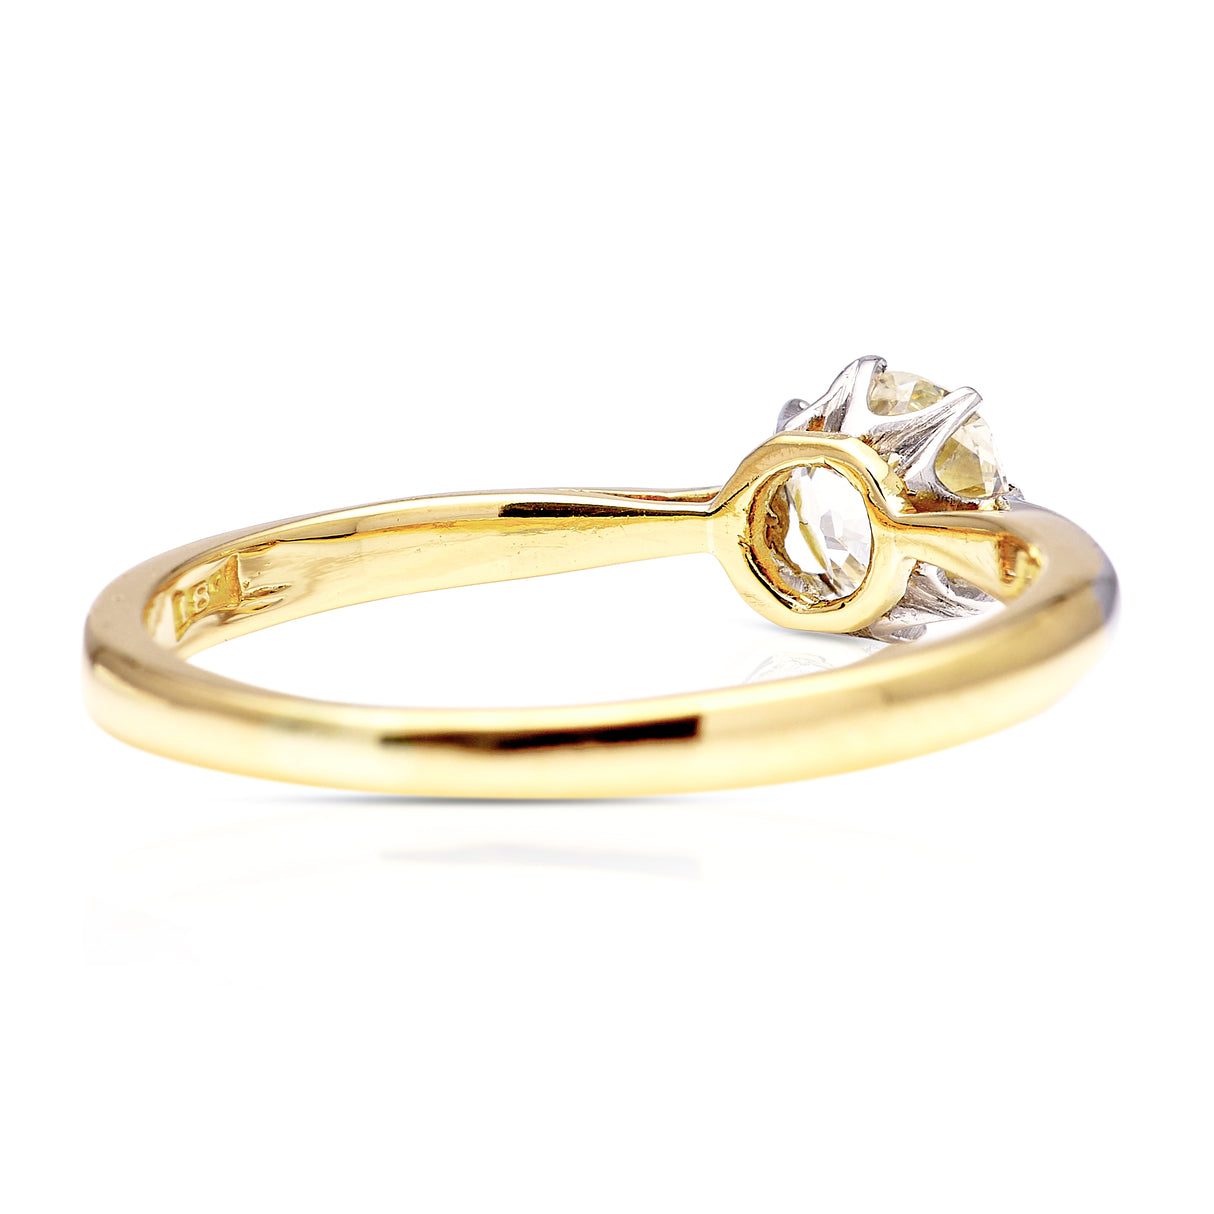 Vintage, 1930s Solitaire Old Cut Diamond Engagement Ring, 18ct Yellow Gold and Platinum